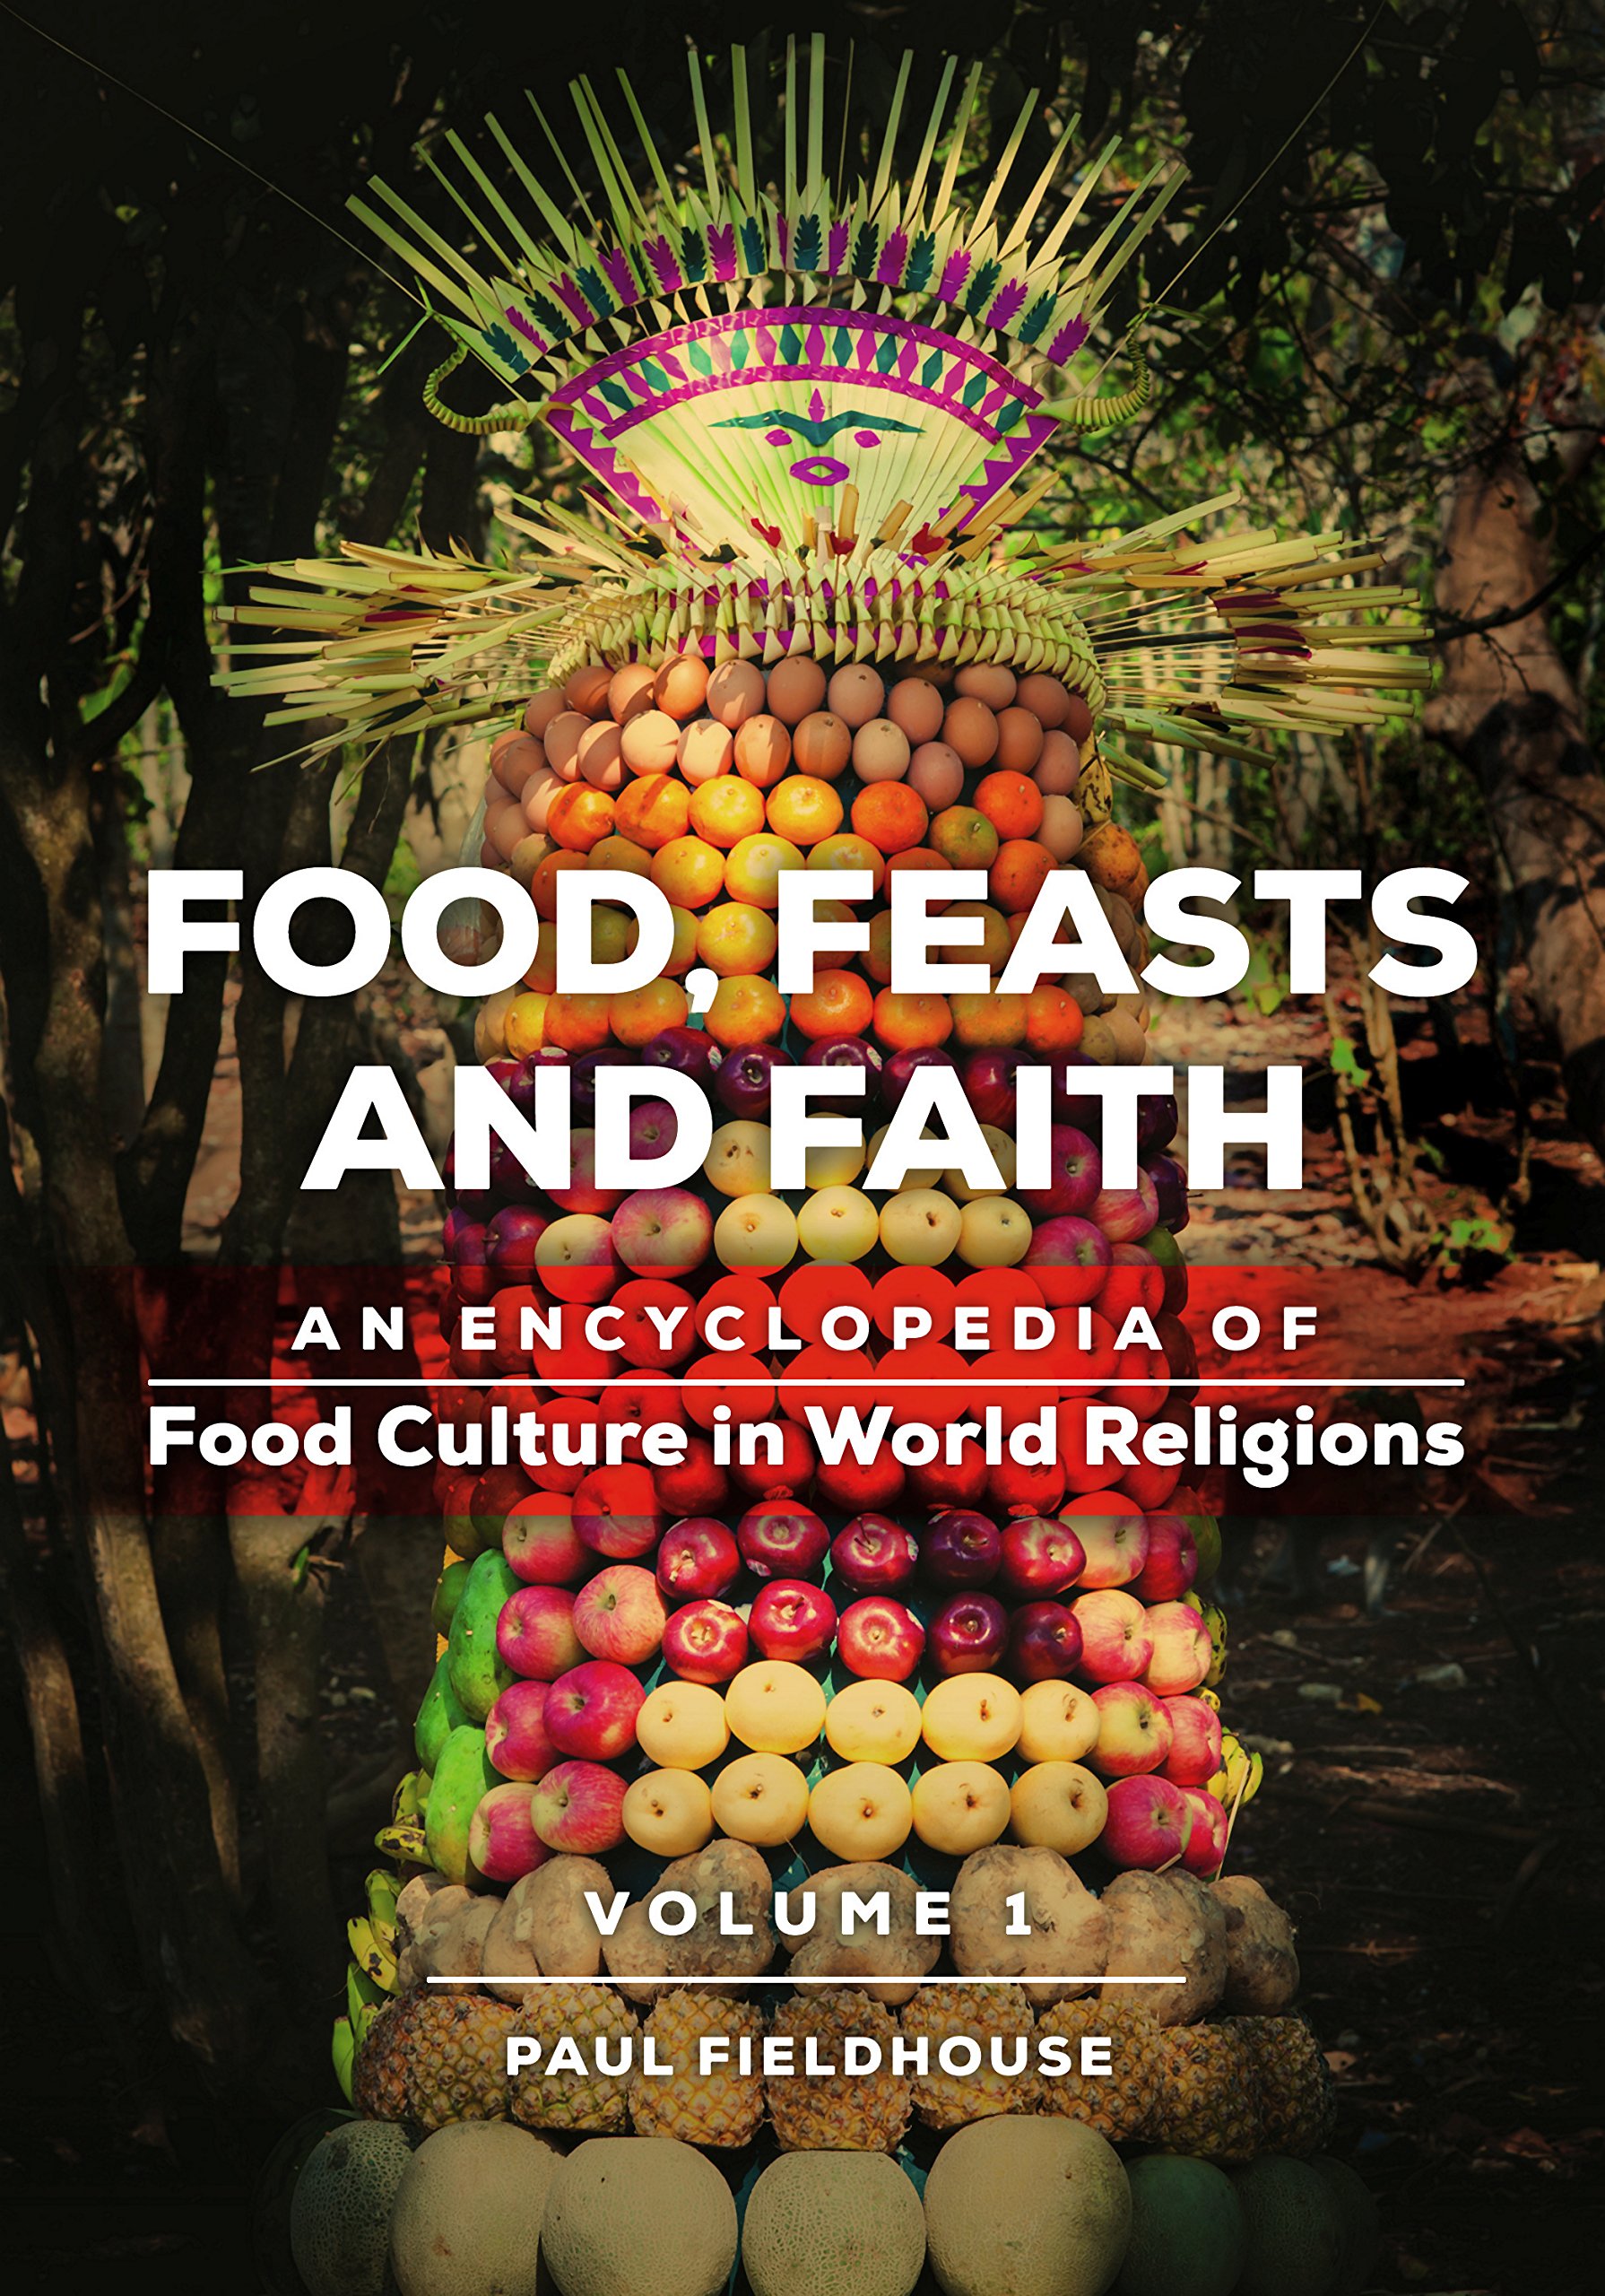 Foods, Feasts, Festivals